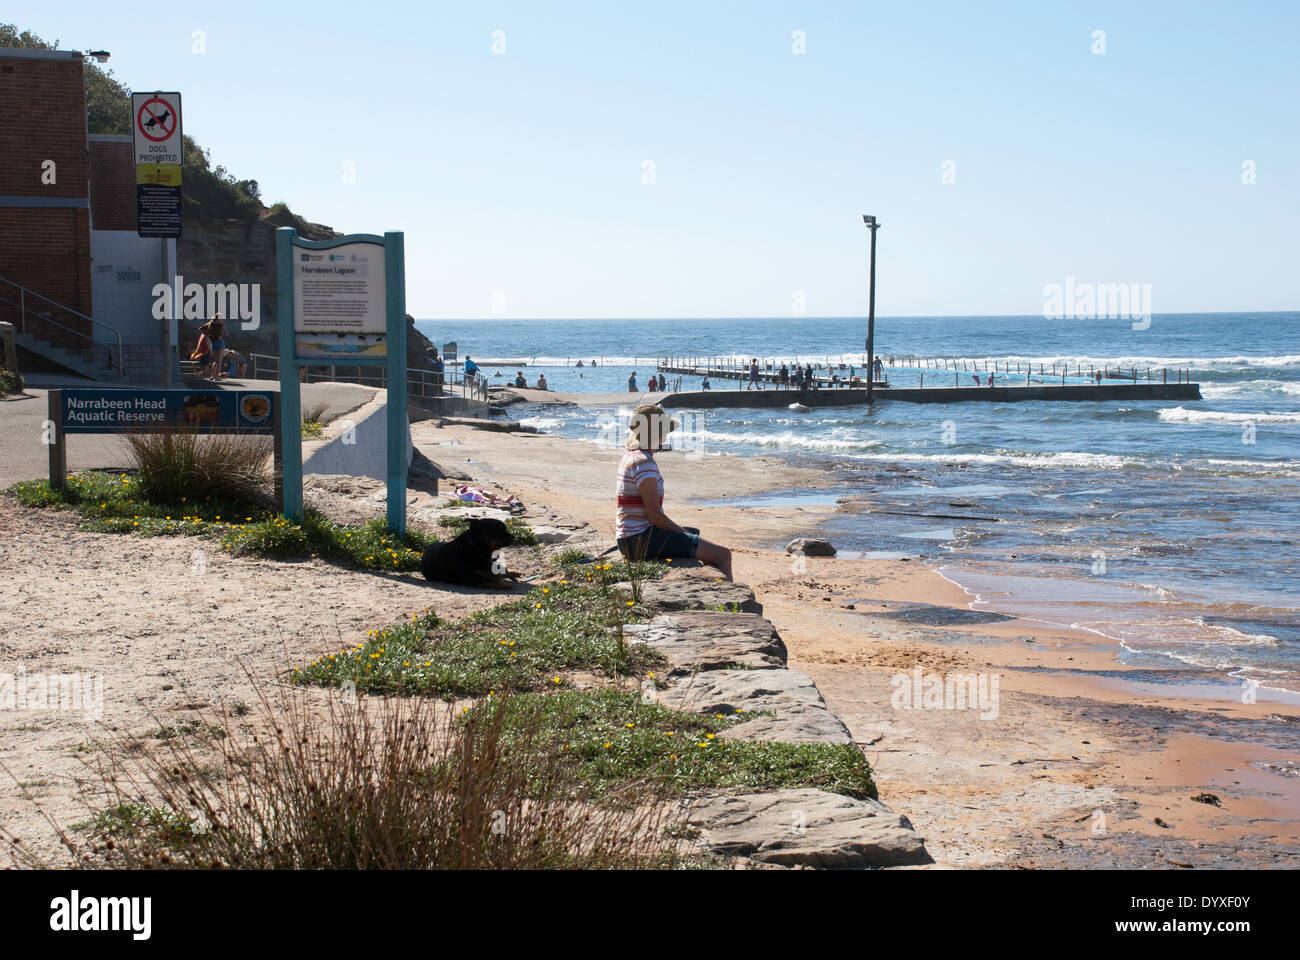 A woman sitting on a stone wall at North Narrabeen beach and lagoon, Sydney. Stock Photo